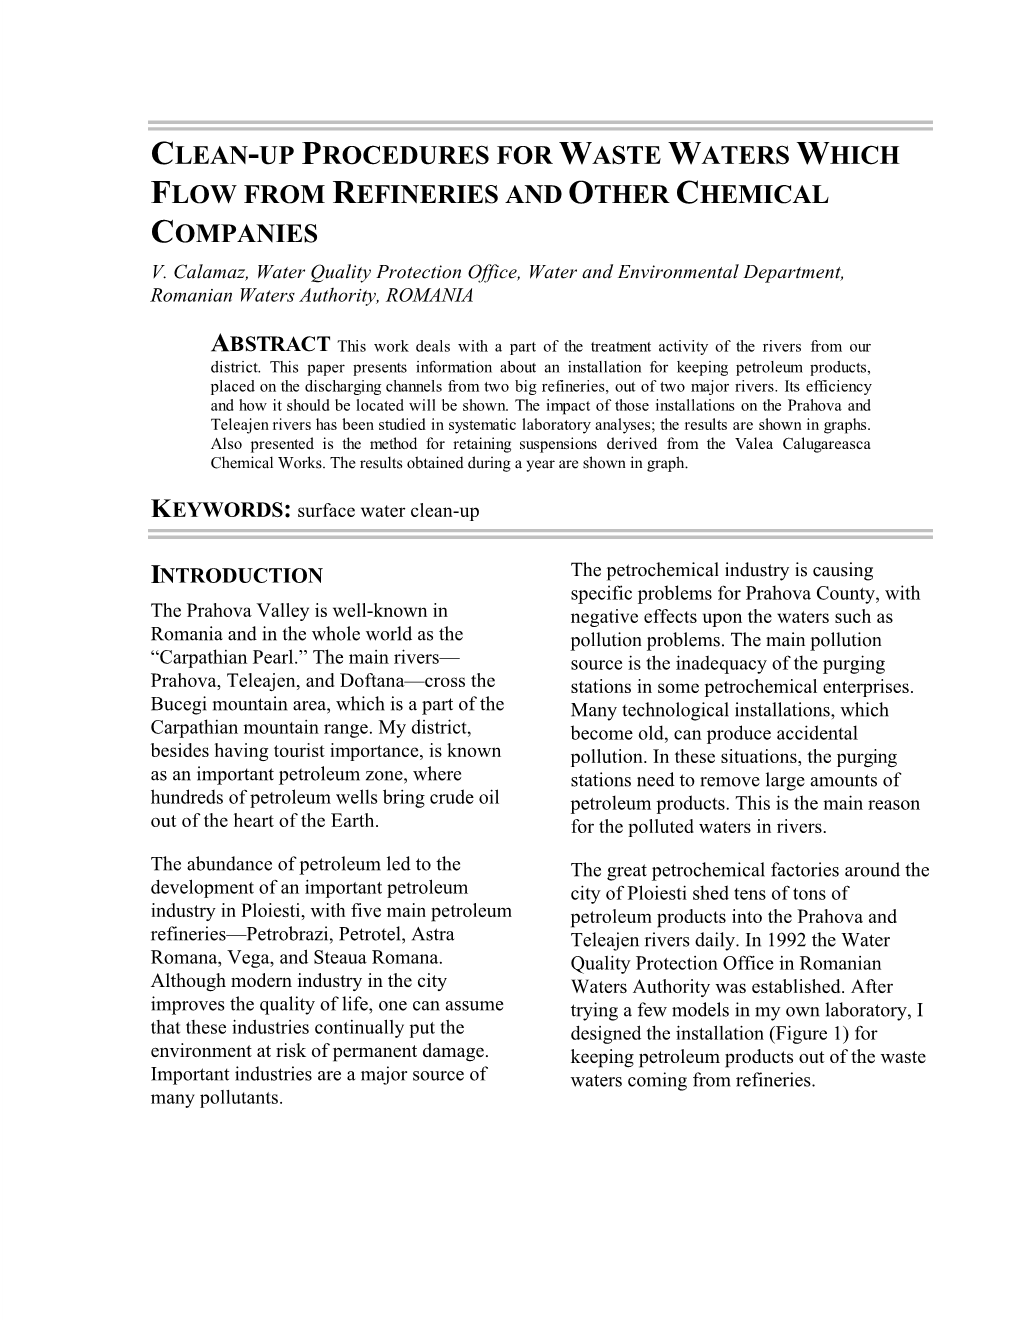 Clean-Up Procedures for Waste Waters Which Flow from Refineries and Other Chemical Companies V